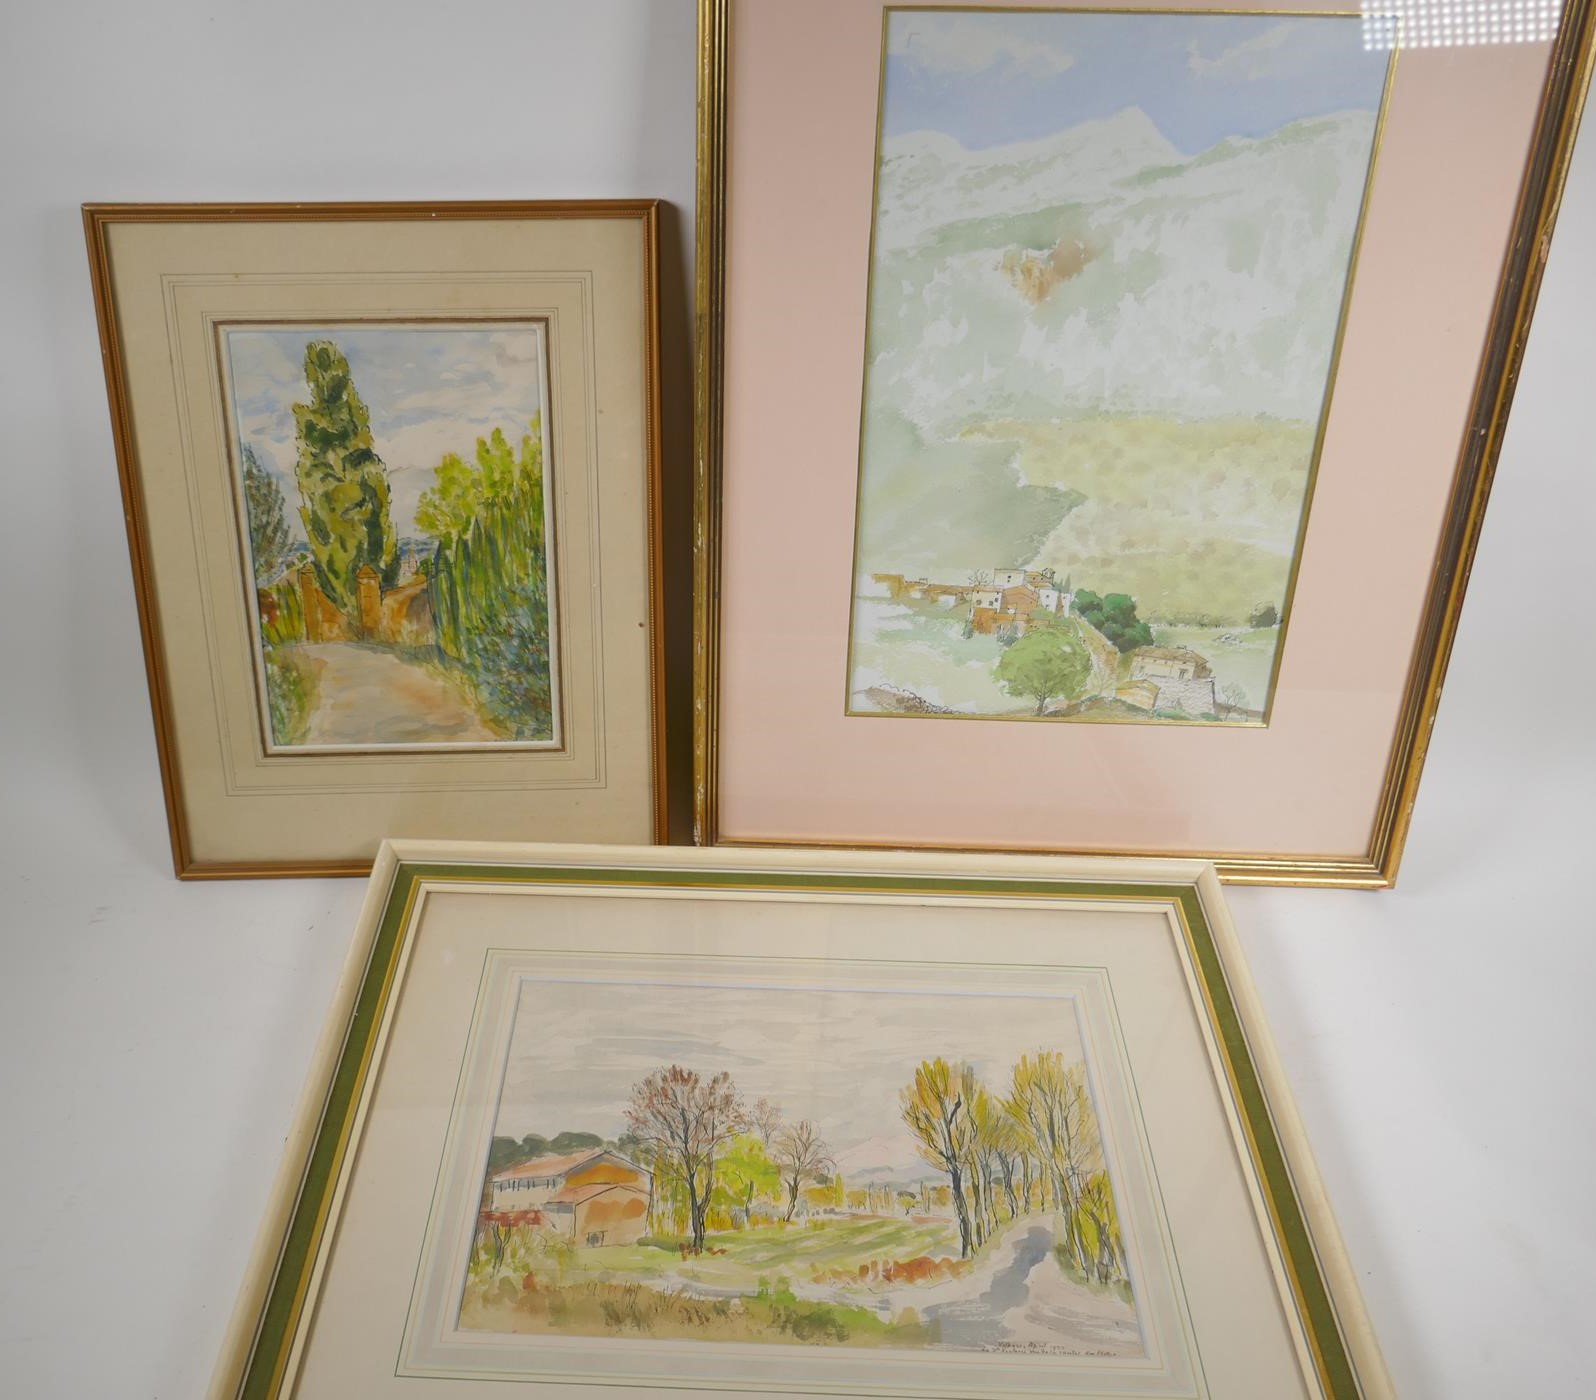 Vilbois, landscape with tree lined road, watercolour, 33cm x 23cm, and two other landscape scenes by